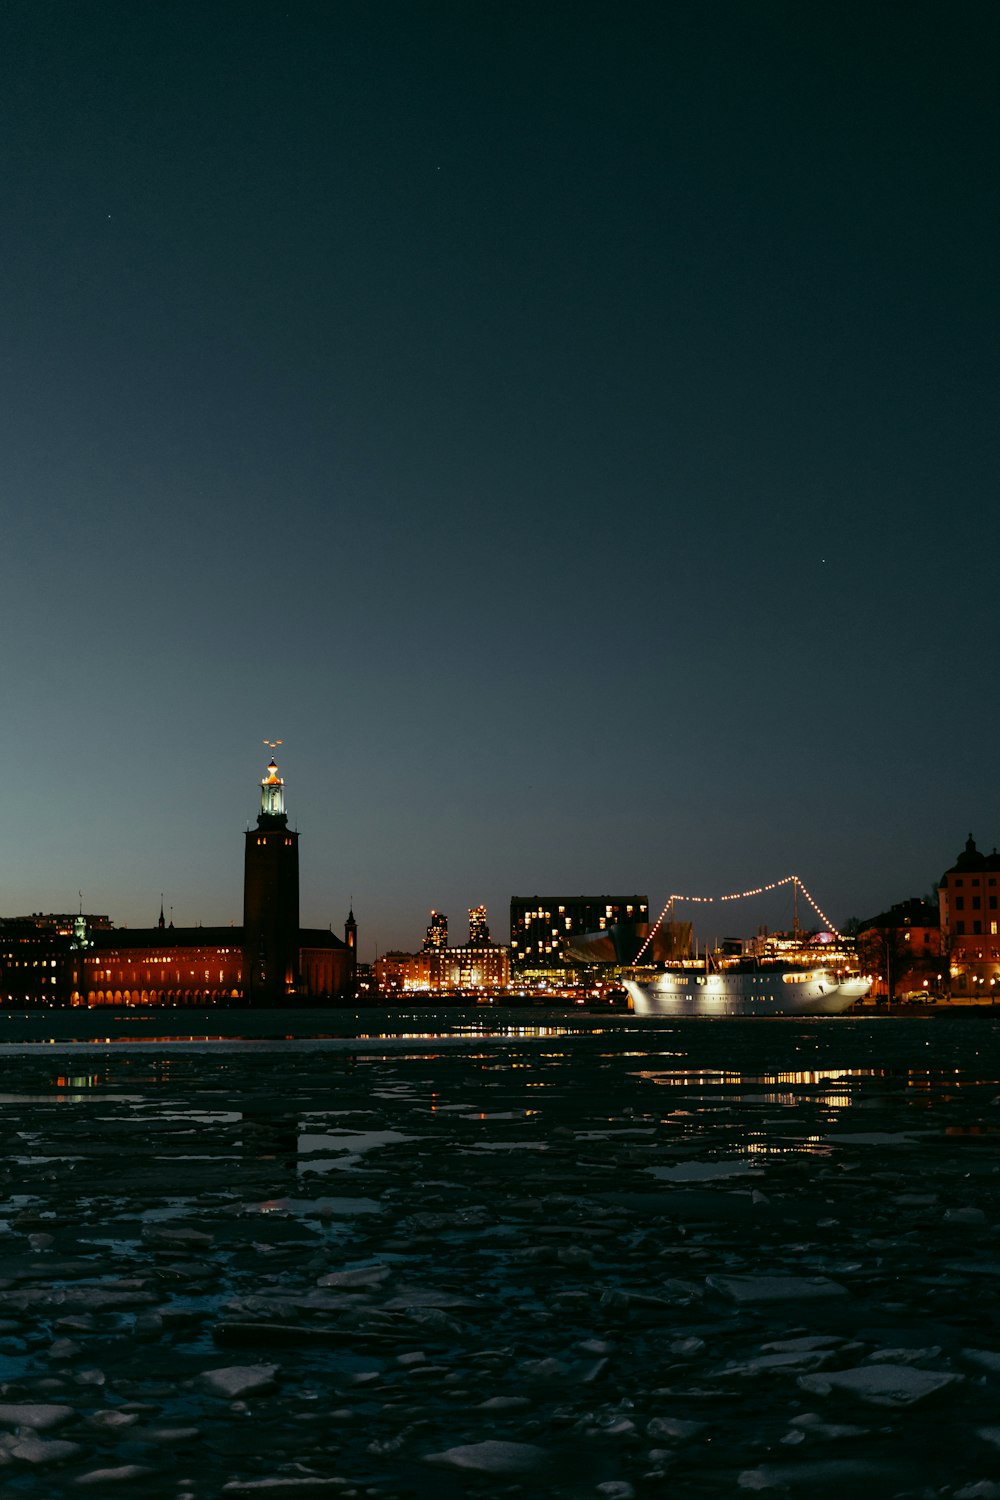 a large body of water at night with a clock tower in the background